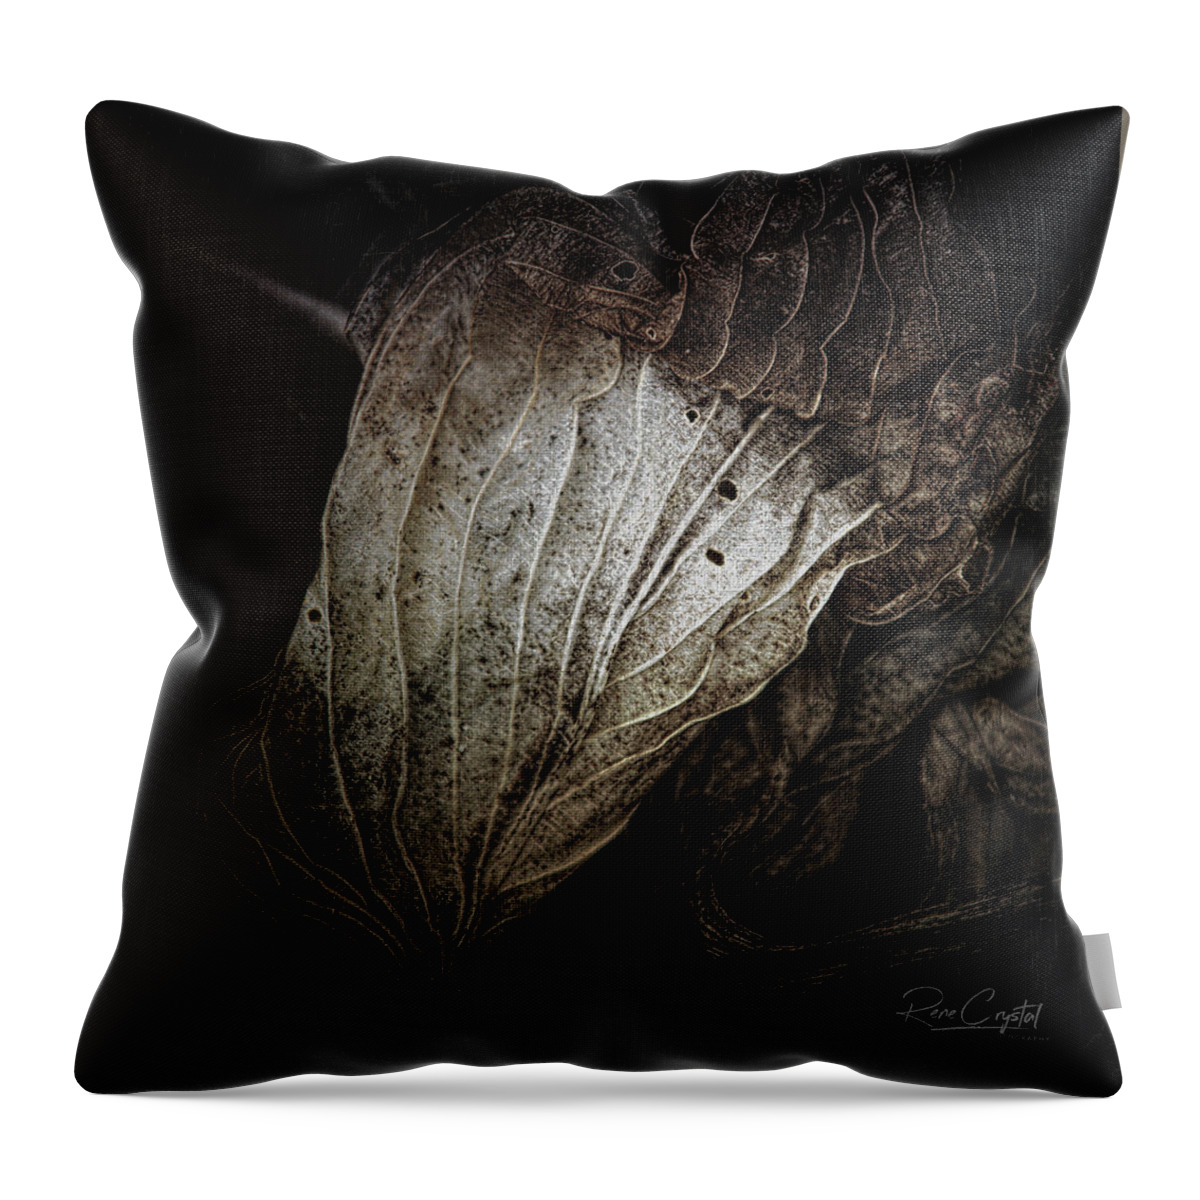 Hosta Throw Pillow featuring the photograph There's Beauty In the Ending, Too by Rene Crystal